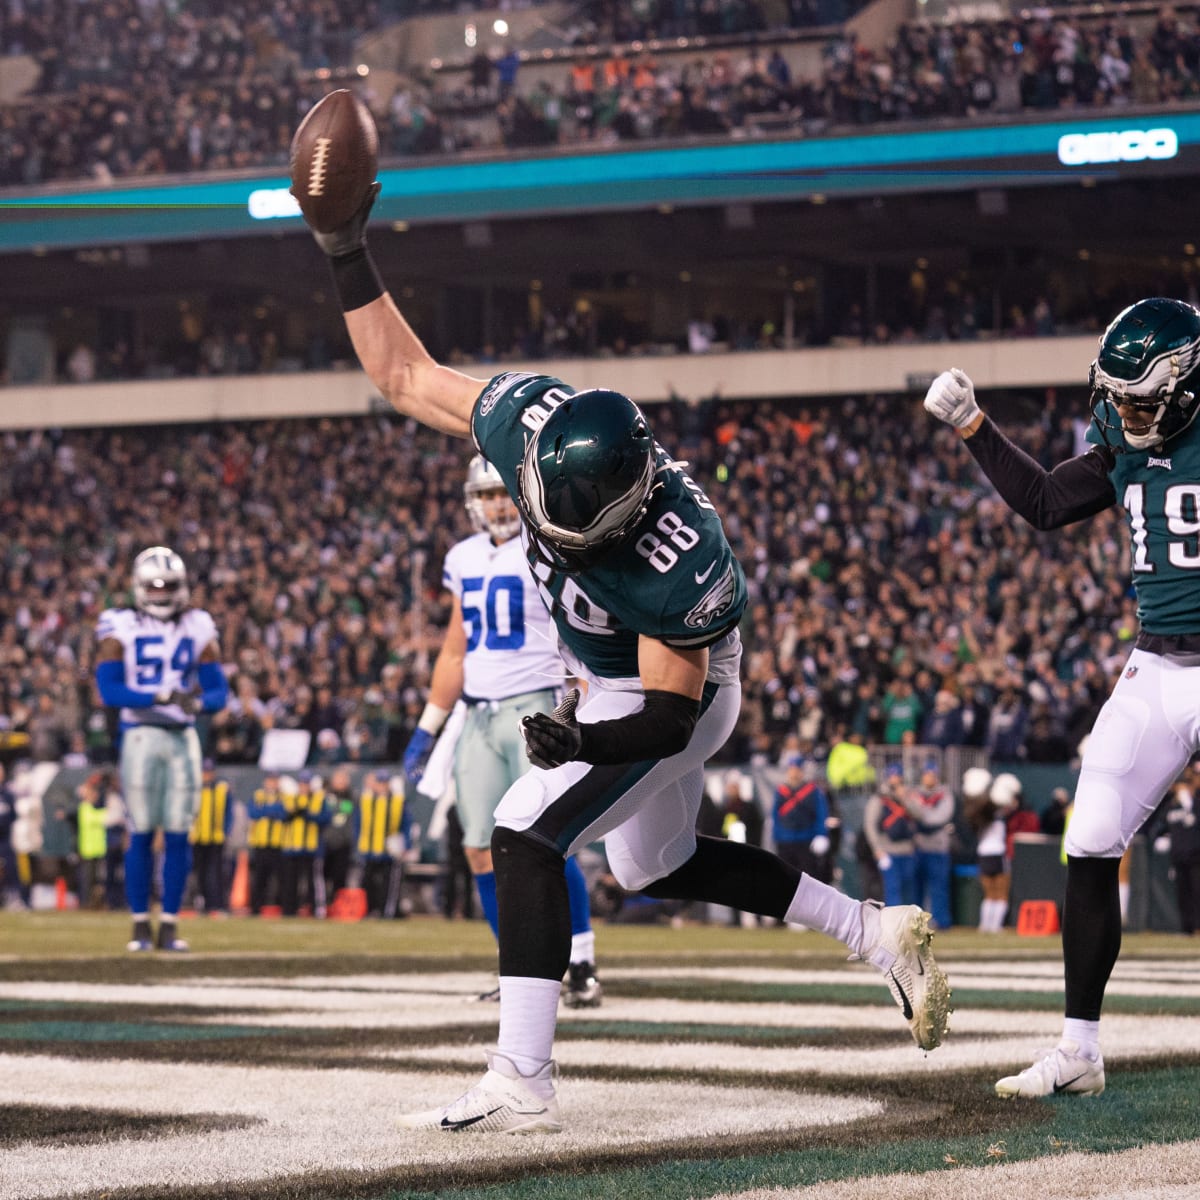 Eagles Ready to retain their Division Title? - NFL NFC East Preview 🏈 